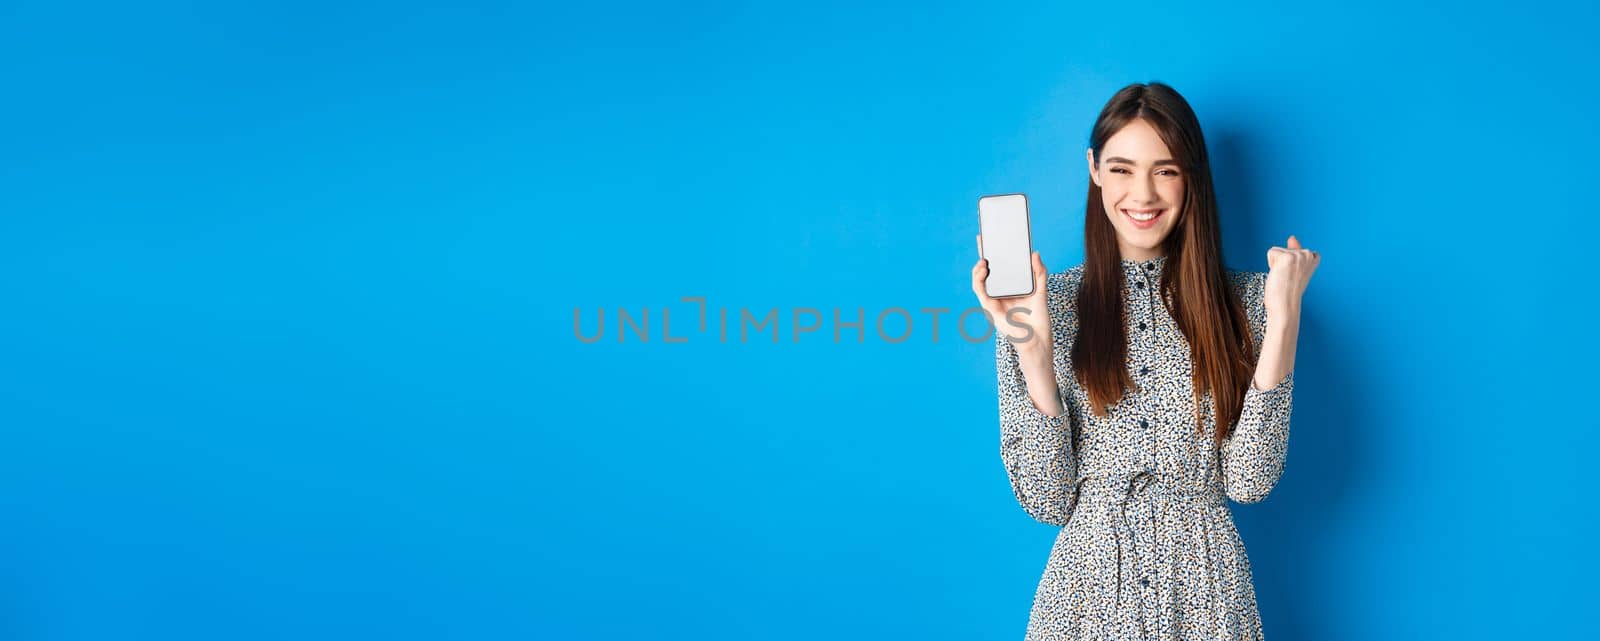 Cheerful pretty girl chanting, winning on mobile phone, showing empty smartphone screen and fist pump, smiling and celebrating, blue background by Benzoix